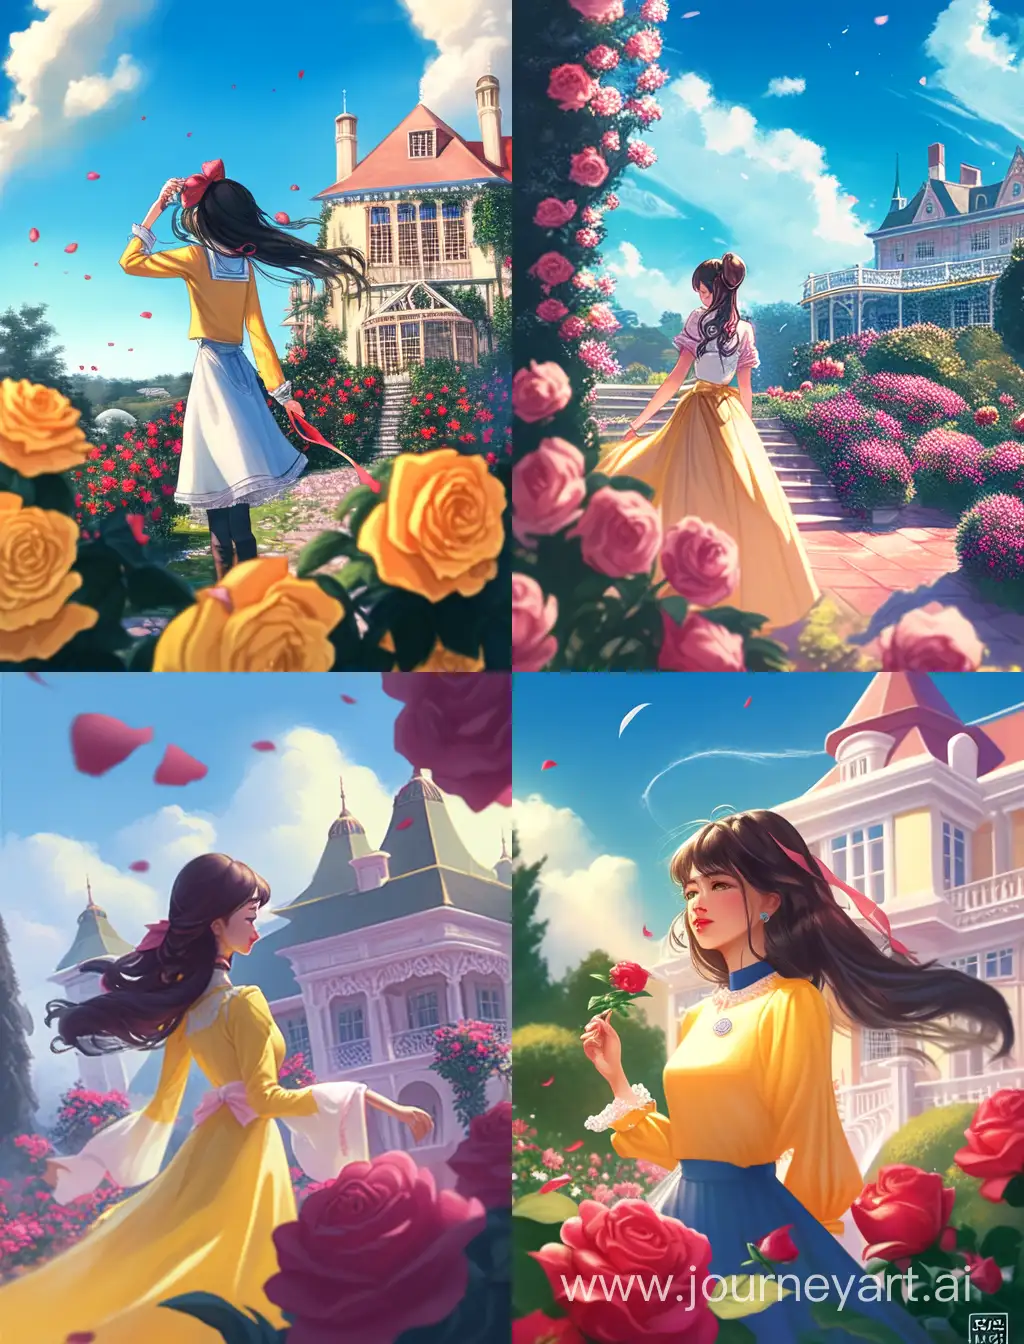 An asian girl in yellow standing in a garden of blooming pink red roses as wind is blowing in daylight, in the far background is a mansion and blue sky, expressive, cute, iPhone wallpaper